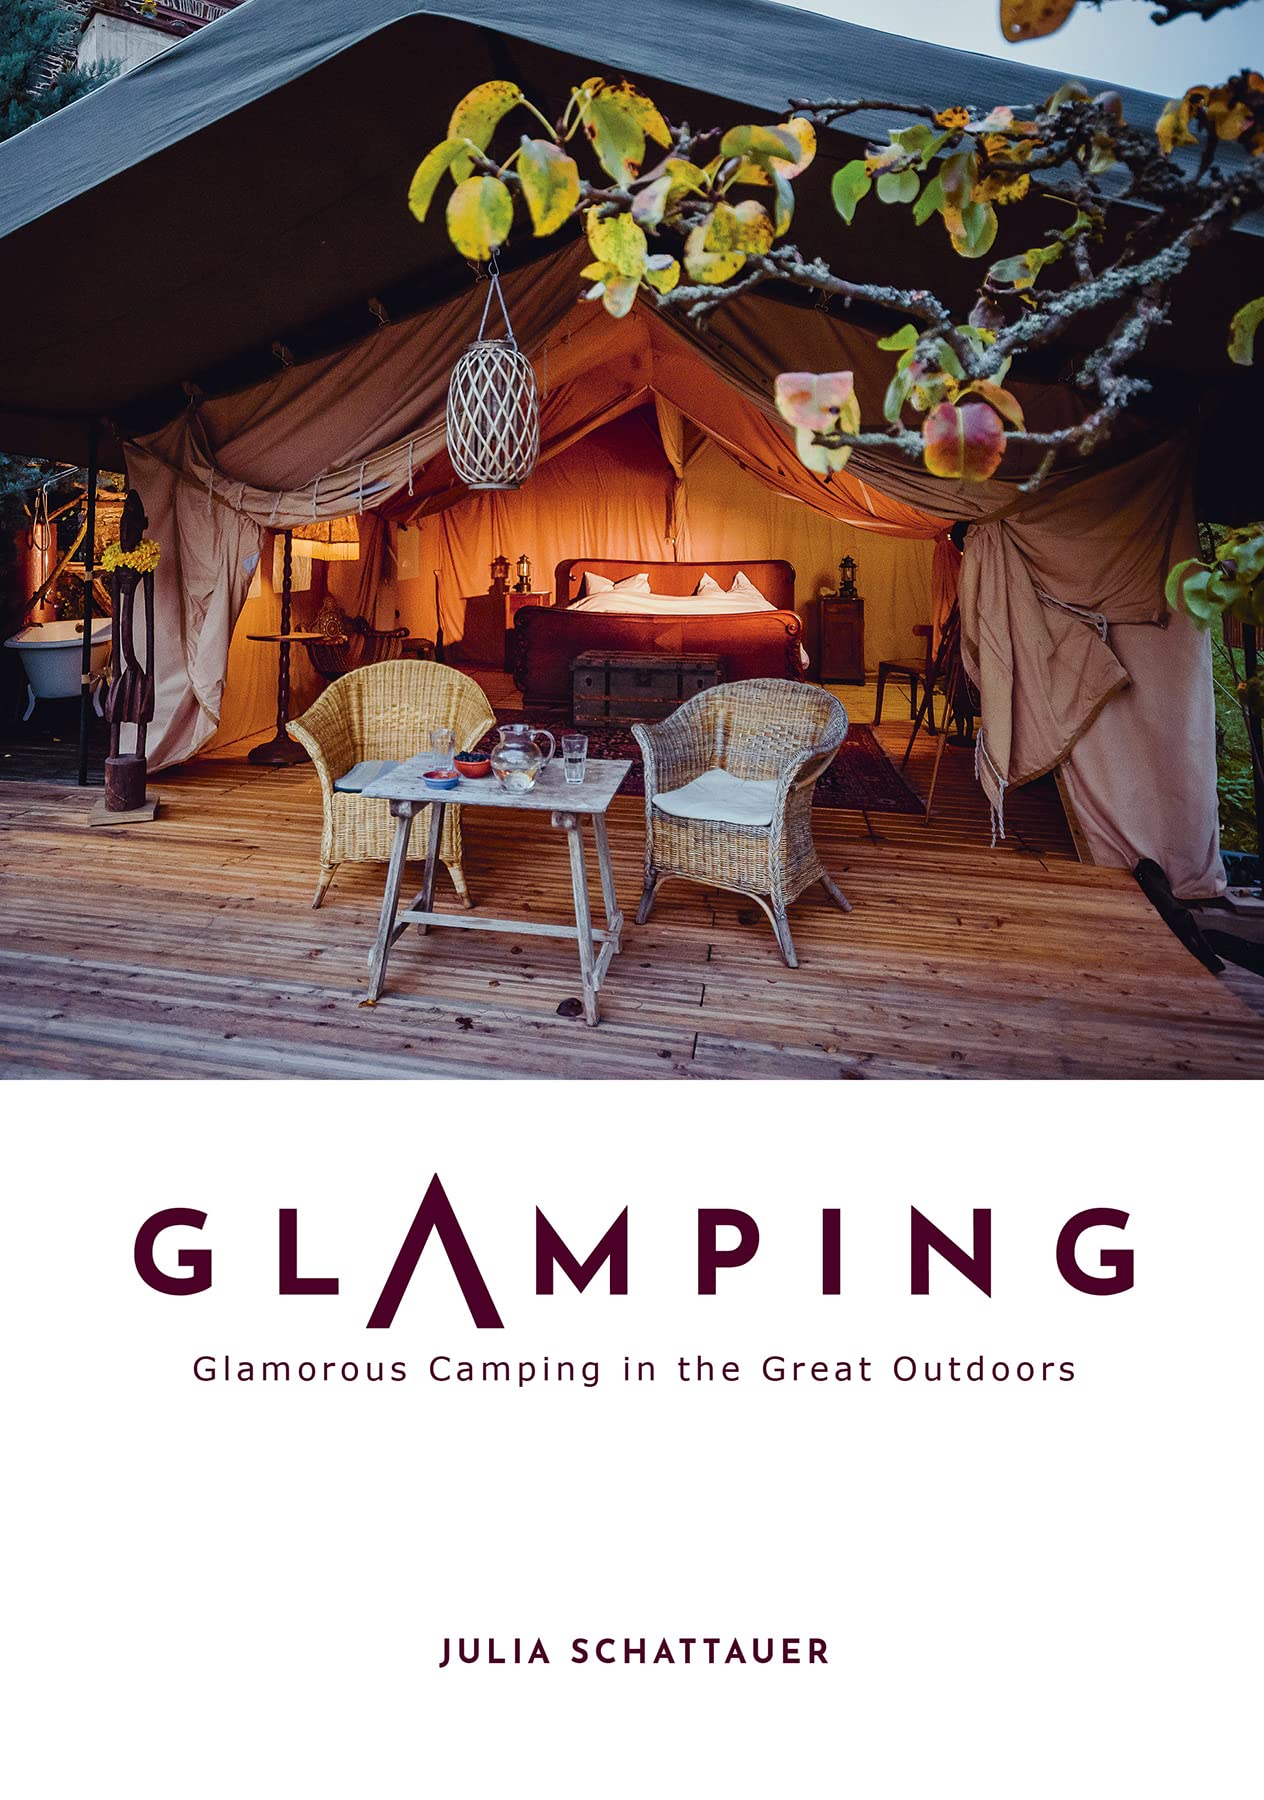 Glamping: Glamorous Camping in the Great Outdoors